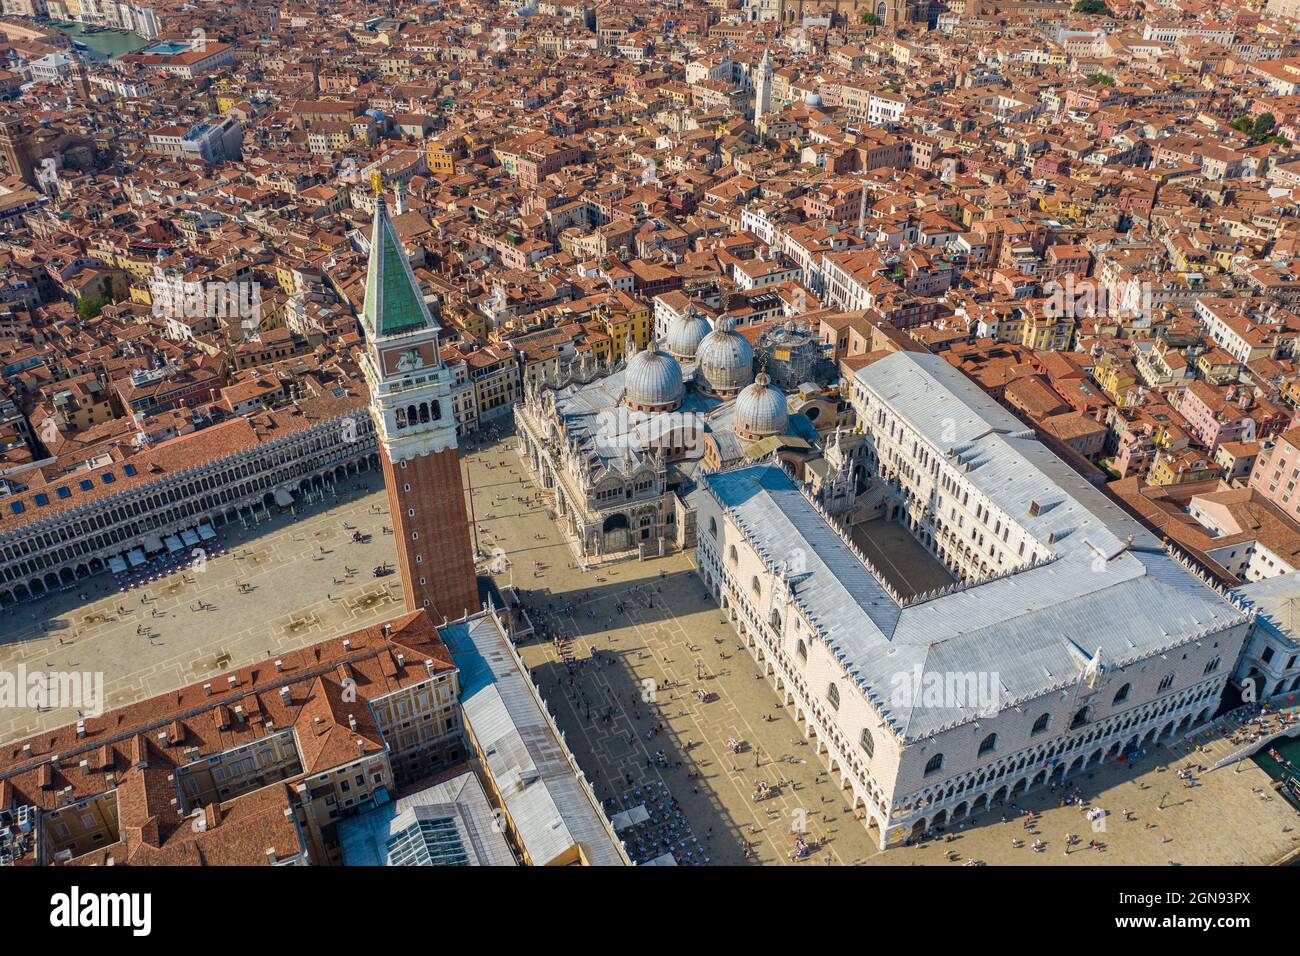 Italy, Veneto, Venice, Aerial view of Piazza San Marco with Doges Palace, Saint Marks Basilica and Saint Marks Campanile Stock Photo